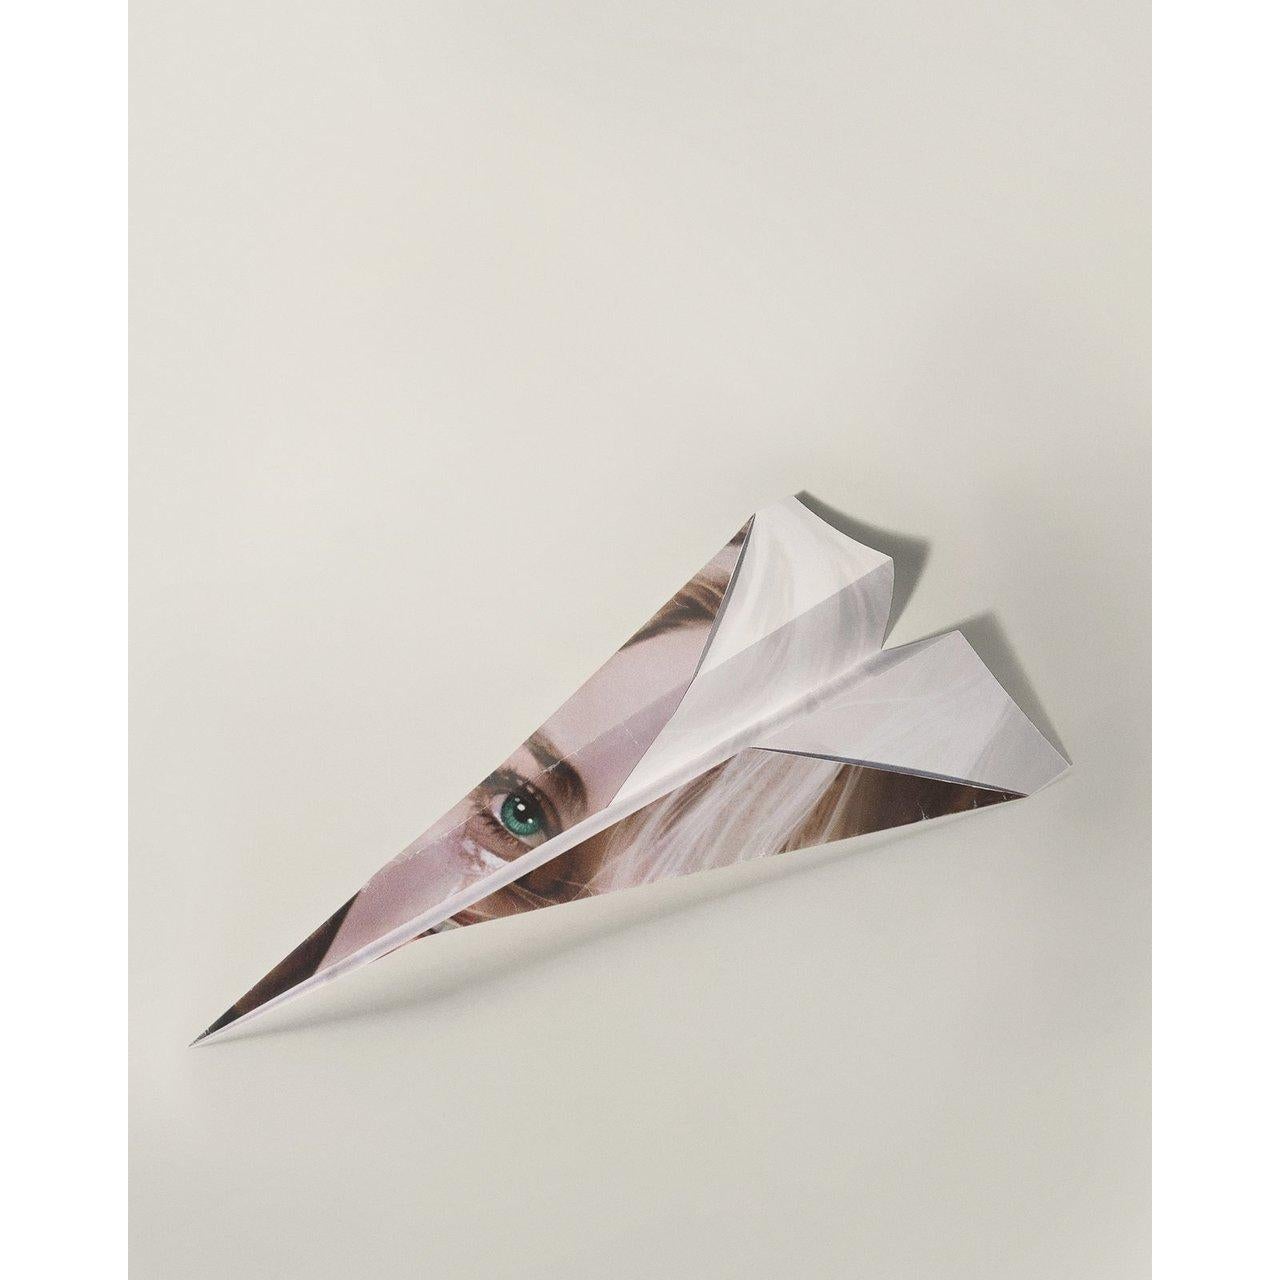 American Paper Airplane 2021 U.S. Giclee Signed For Sale